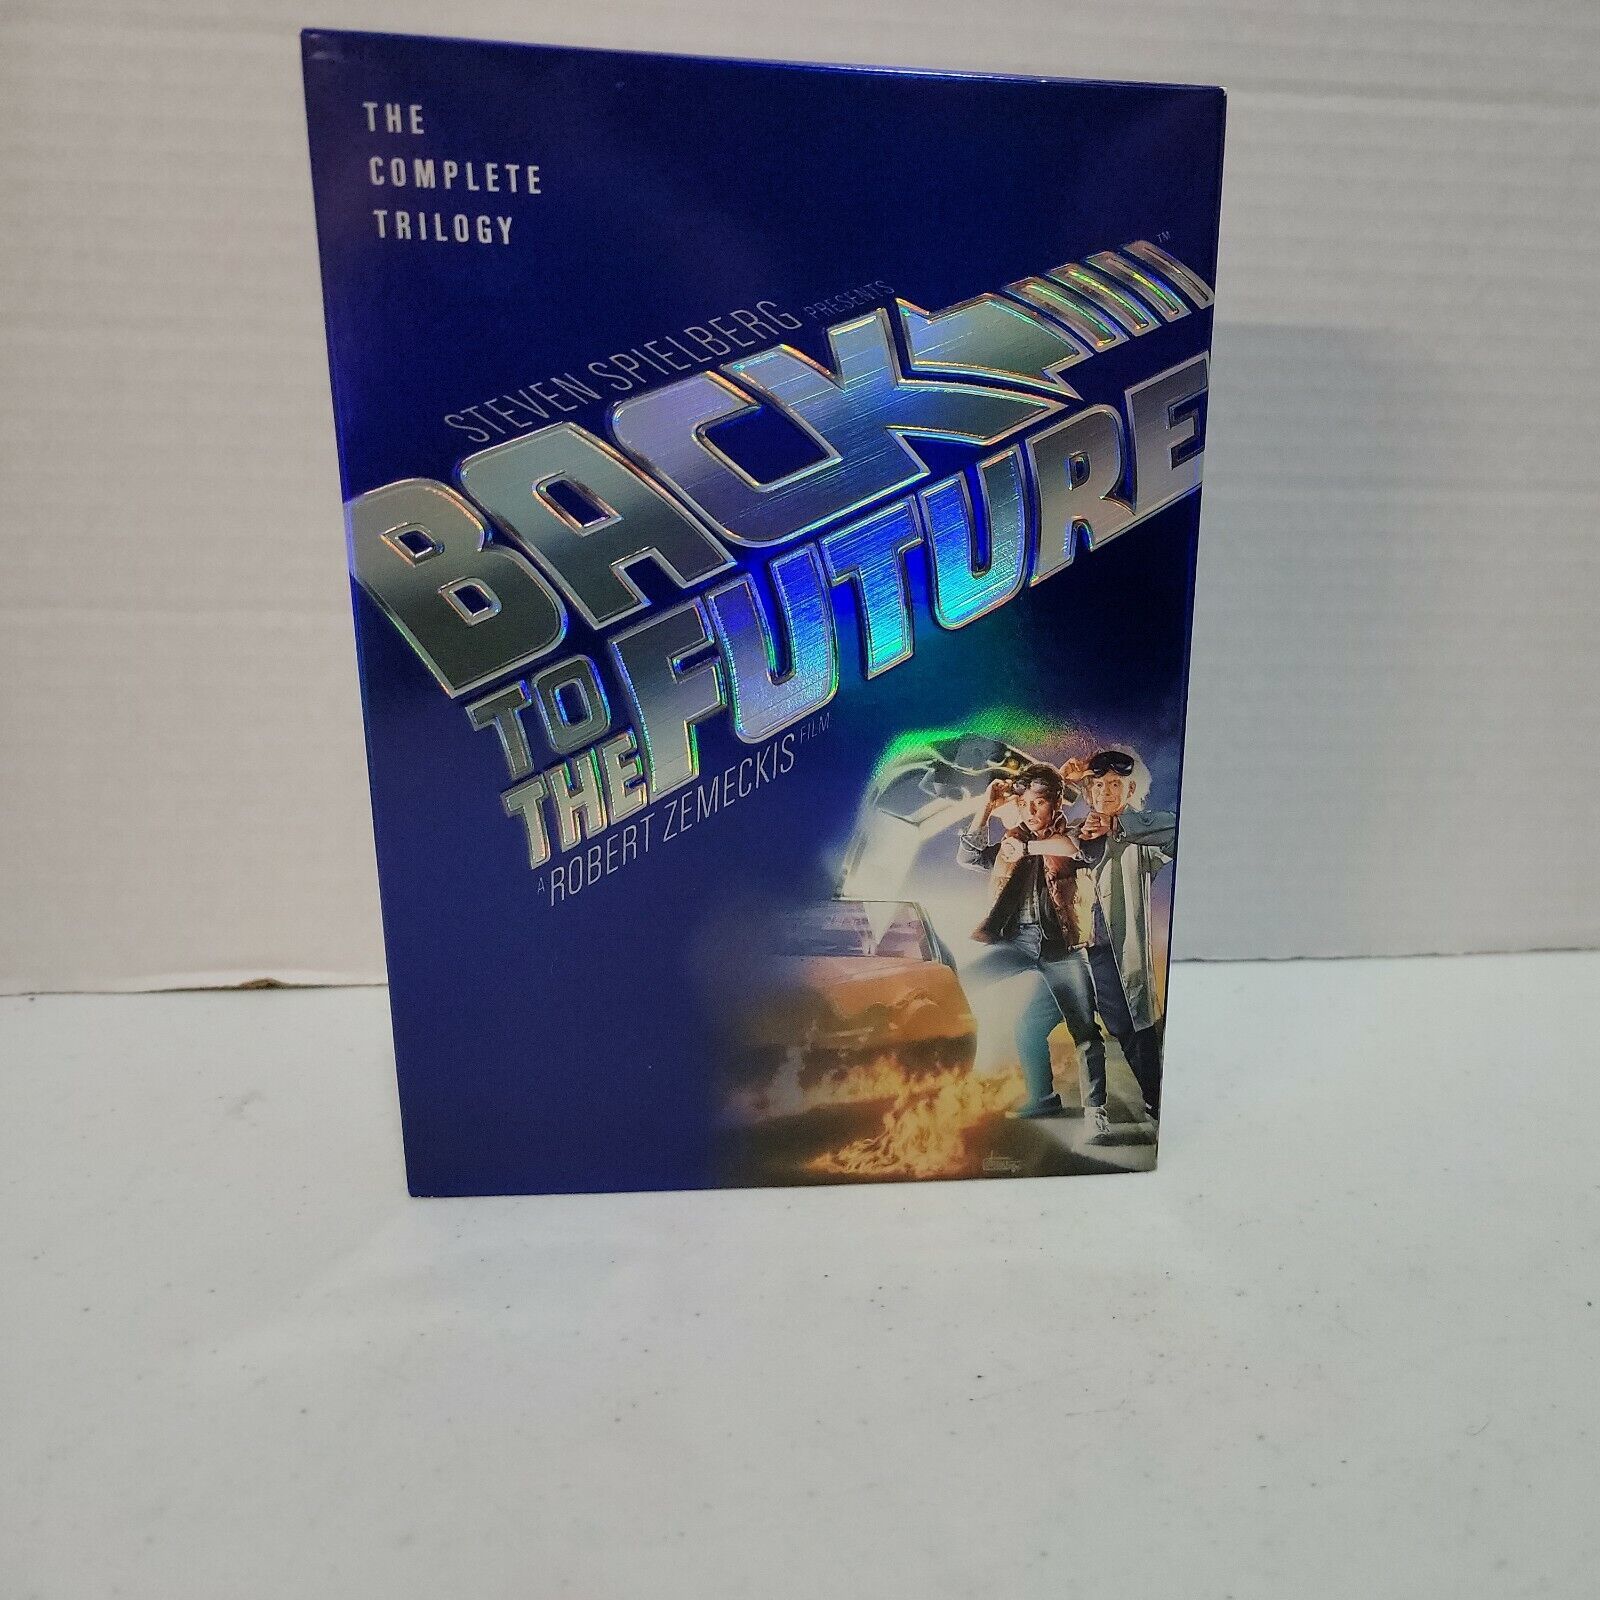 Primary image for Back to the Future: The Complete Trilogy (Widescreen Edition) DVD, Lea Thompson,